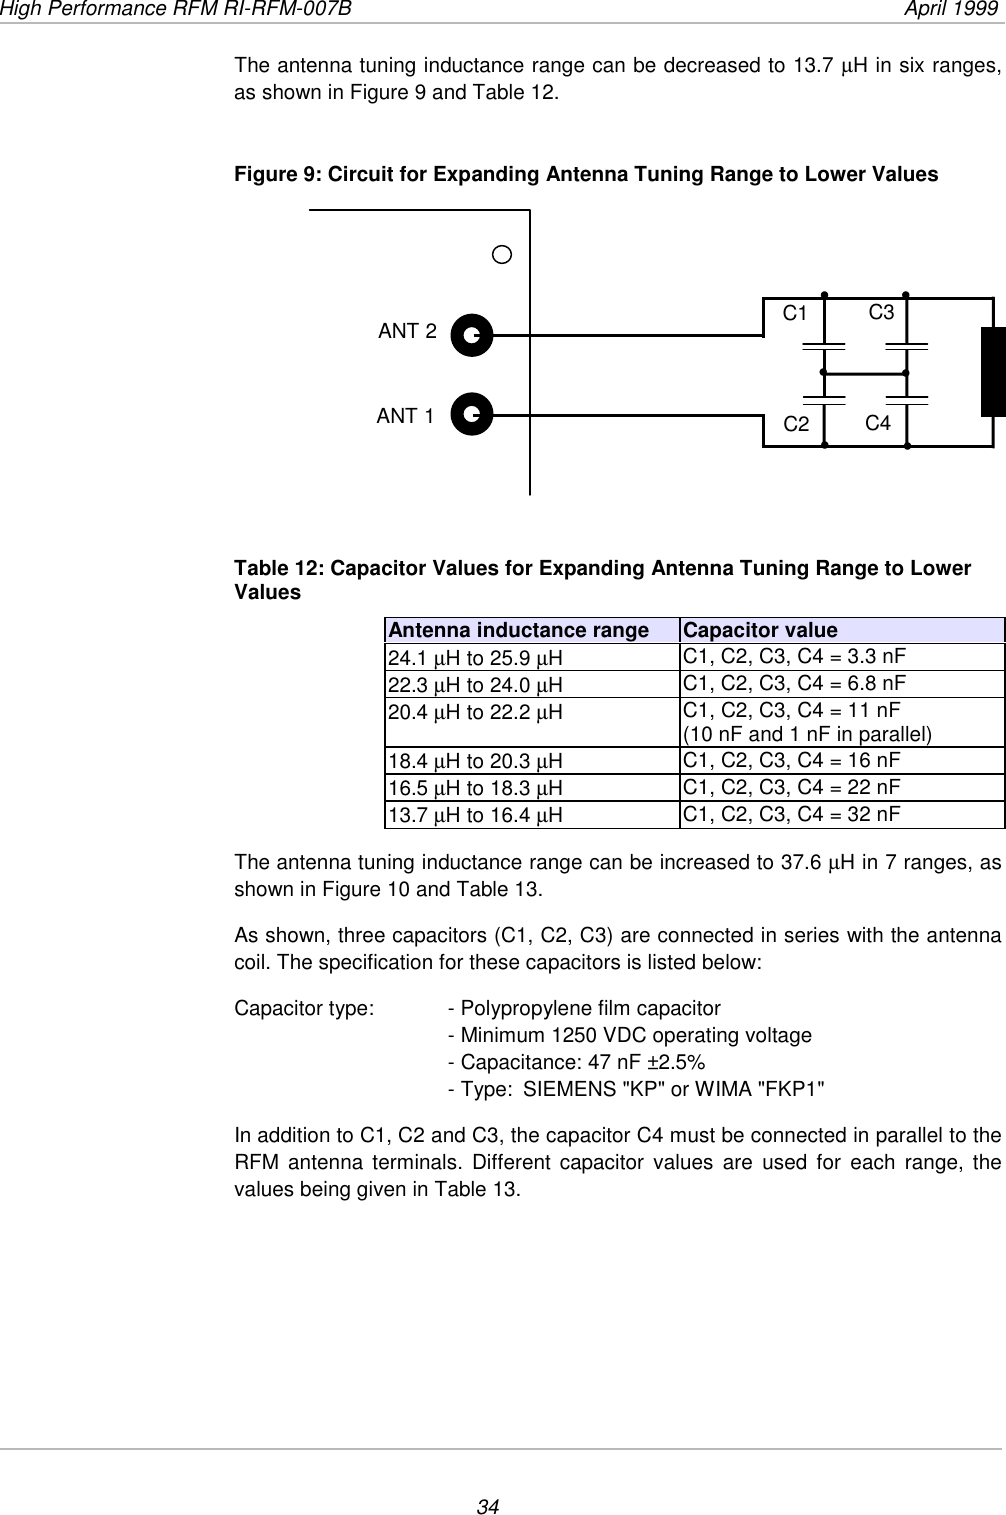 High Performance RFM RI-RFM-007B  April 199934The antenna tuning inductance range can be decreased to 13.7 µH in six ranges,as shown in Figure 9 and Table 12.Figure 9: Circuit for Expanding Antenna Tuning Range to Lower ValuesTable 12: Capacitor Values for Expanding Antenna Tuning Range to LowerValuesAntenna inductance range Capacitor value24.1 µH to 25.9 µHC1, C2, C3, C4 = 3.3 nF22.3 µH to 24.0 µHC1, C2, C3, C4 = 6.8 nF20.4 µH to 22.2 µHC1, C2, C3, C4 = 11 nF(10 nF and 1 nF in parallel)18.4 µH to 20.3 µHC1, C2, C3, C4 = 16 nF16.5 µH to 18.3 µHC1, C2, C3, C4 = 22 nF13.7 µH to 16.4 µHC1, C2, C3, C4 = 32 nFThe antenna tuning inductance range can be increased to 37.6 µH in 7 ranges, asshown in Figure 10 and Table 13.As shown, three capacitors (C1, C2, C3) are connected in series with the antennacoil. The specification for these capacitors is listed below:Capacitor type: - Polypropylene film capacitor- Minimum 1250 VDC operating voltage- Capacitance: 47 nF ±2.5%- Type:  SIEMENS &quot;KP&quot; or WIMA &quot;FKP1&quot;In addition to C1, C2 and C3, the capacitor C4 must be connected in parallel to theRFM antenna terminals. Different capacitor values are used for each range, thevalues being given in Table 13.ANT 2ANT 1••••••C1 C3C4C2